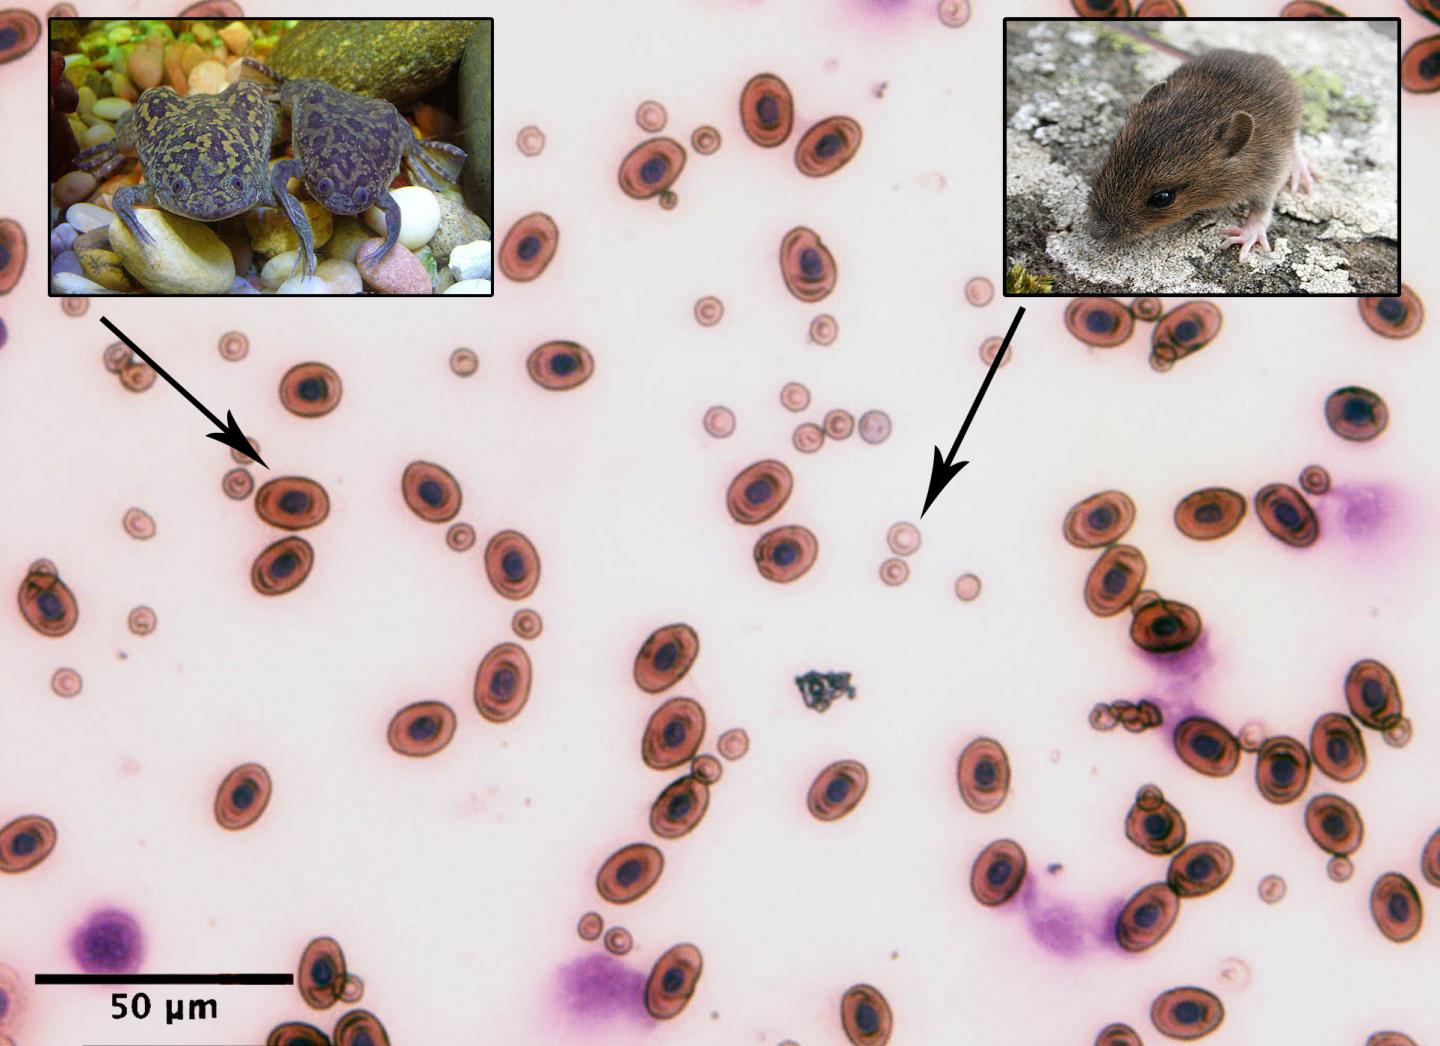 Amphibian and Mammal Red Blood Cells Side-By-Side